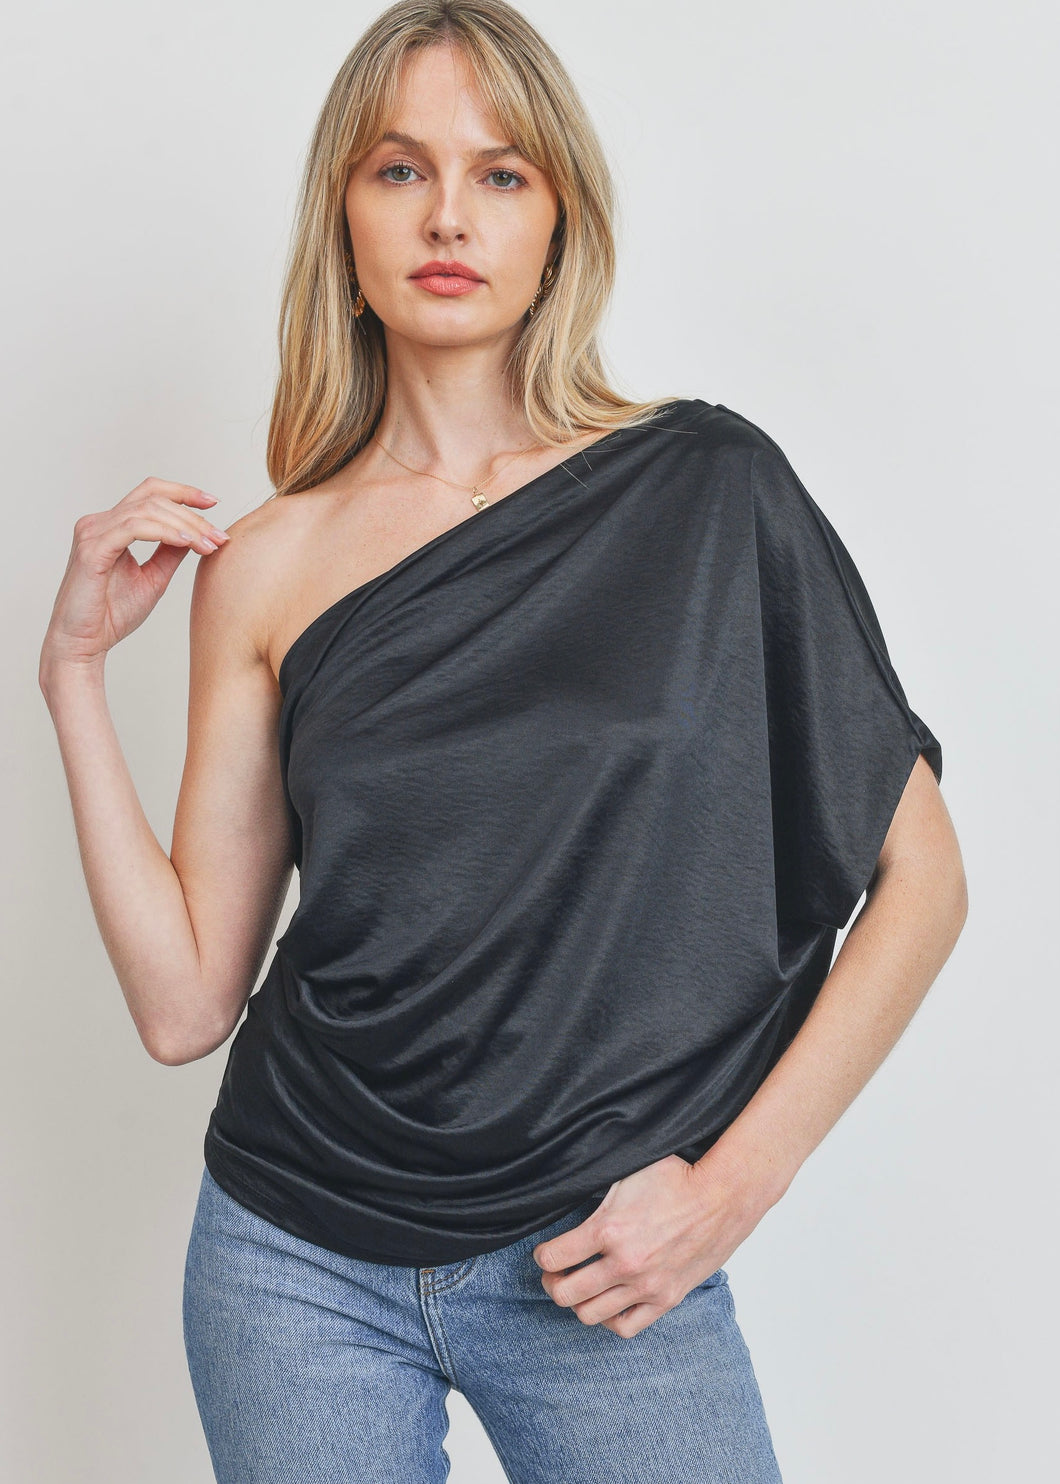 All Night One Shoulder Pleat Top